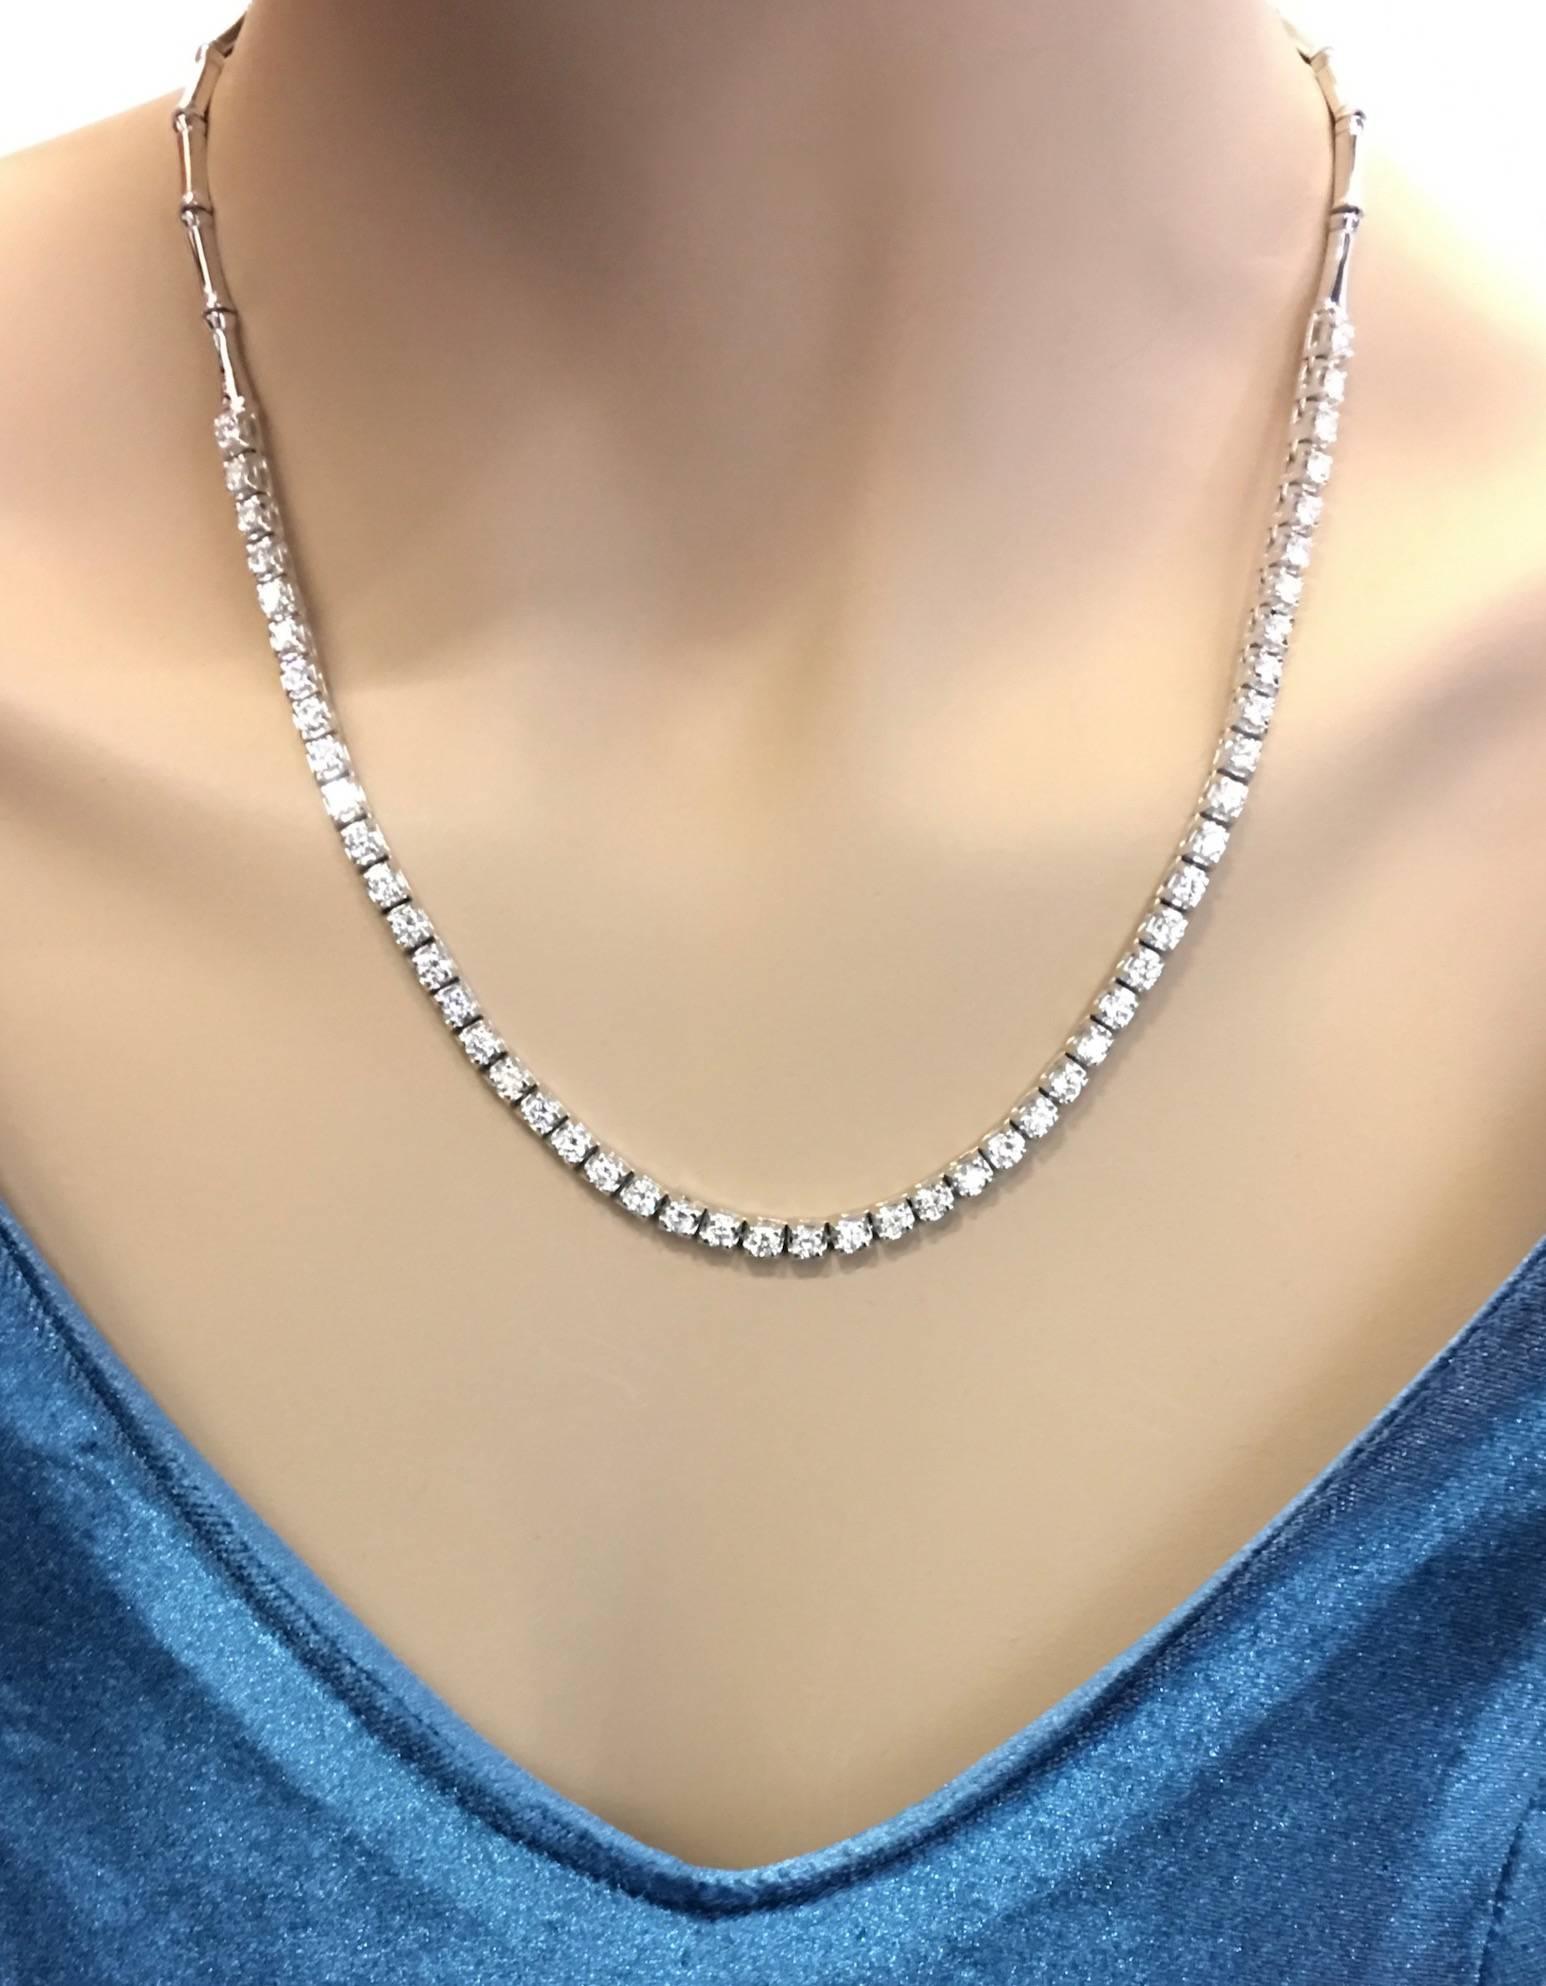 Diamond Riviere Necklace composed by 50 diamonds (F color, Vvs1 clarity) on white gold 18k 750. The necklace is beautifully stylized.
Contemporary.
Total Diamond weight: 5.28 carats
Total length: 18.50 inches (47.00 centimeters)